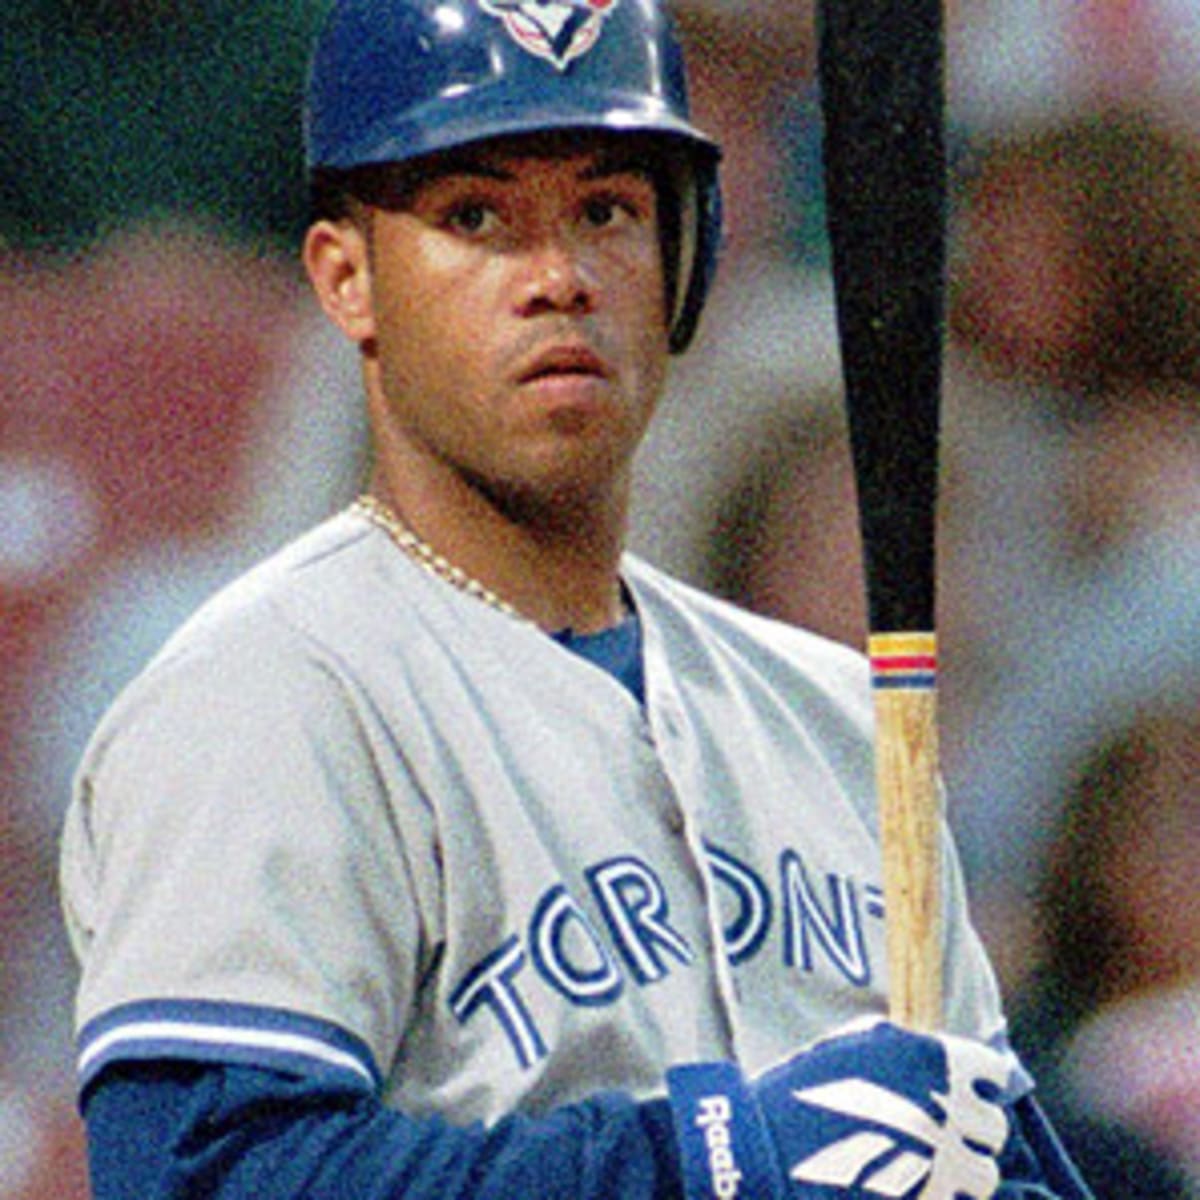 Cliff Corcoran: Where does Alomar rank among game's best second